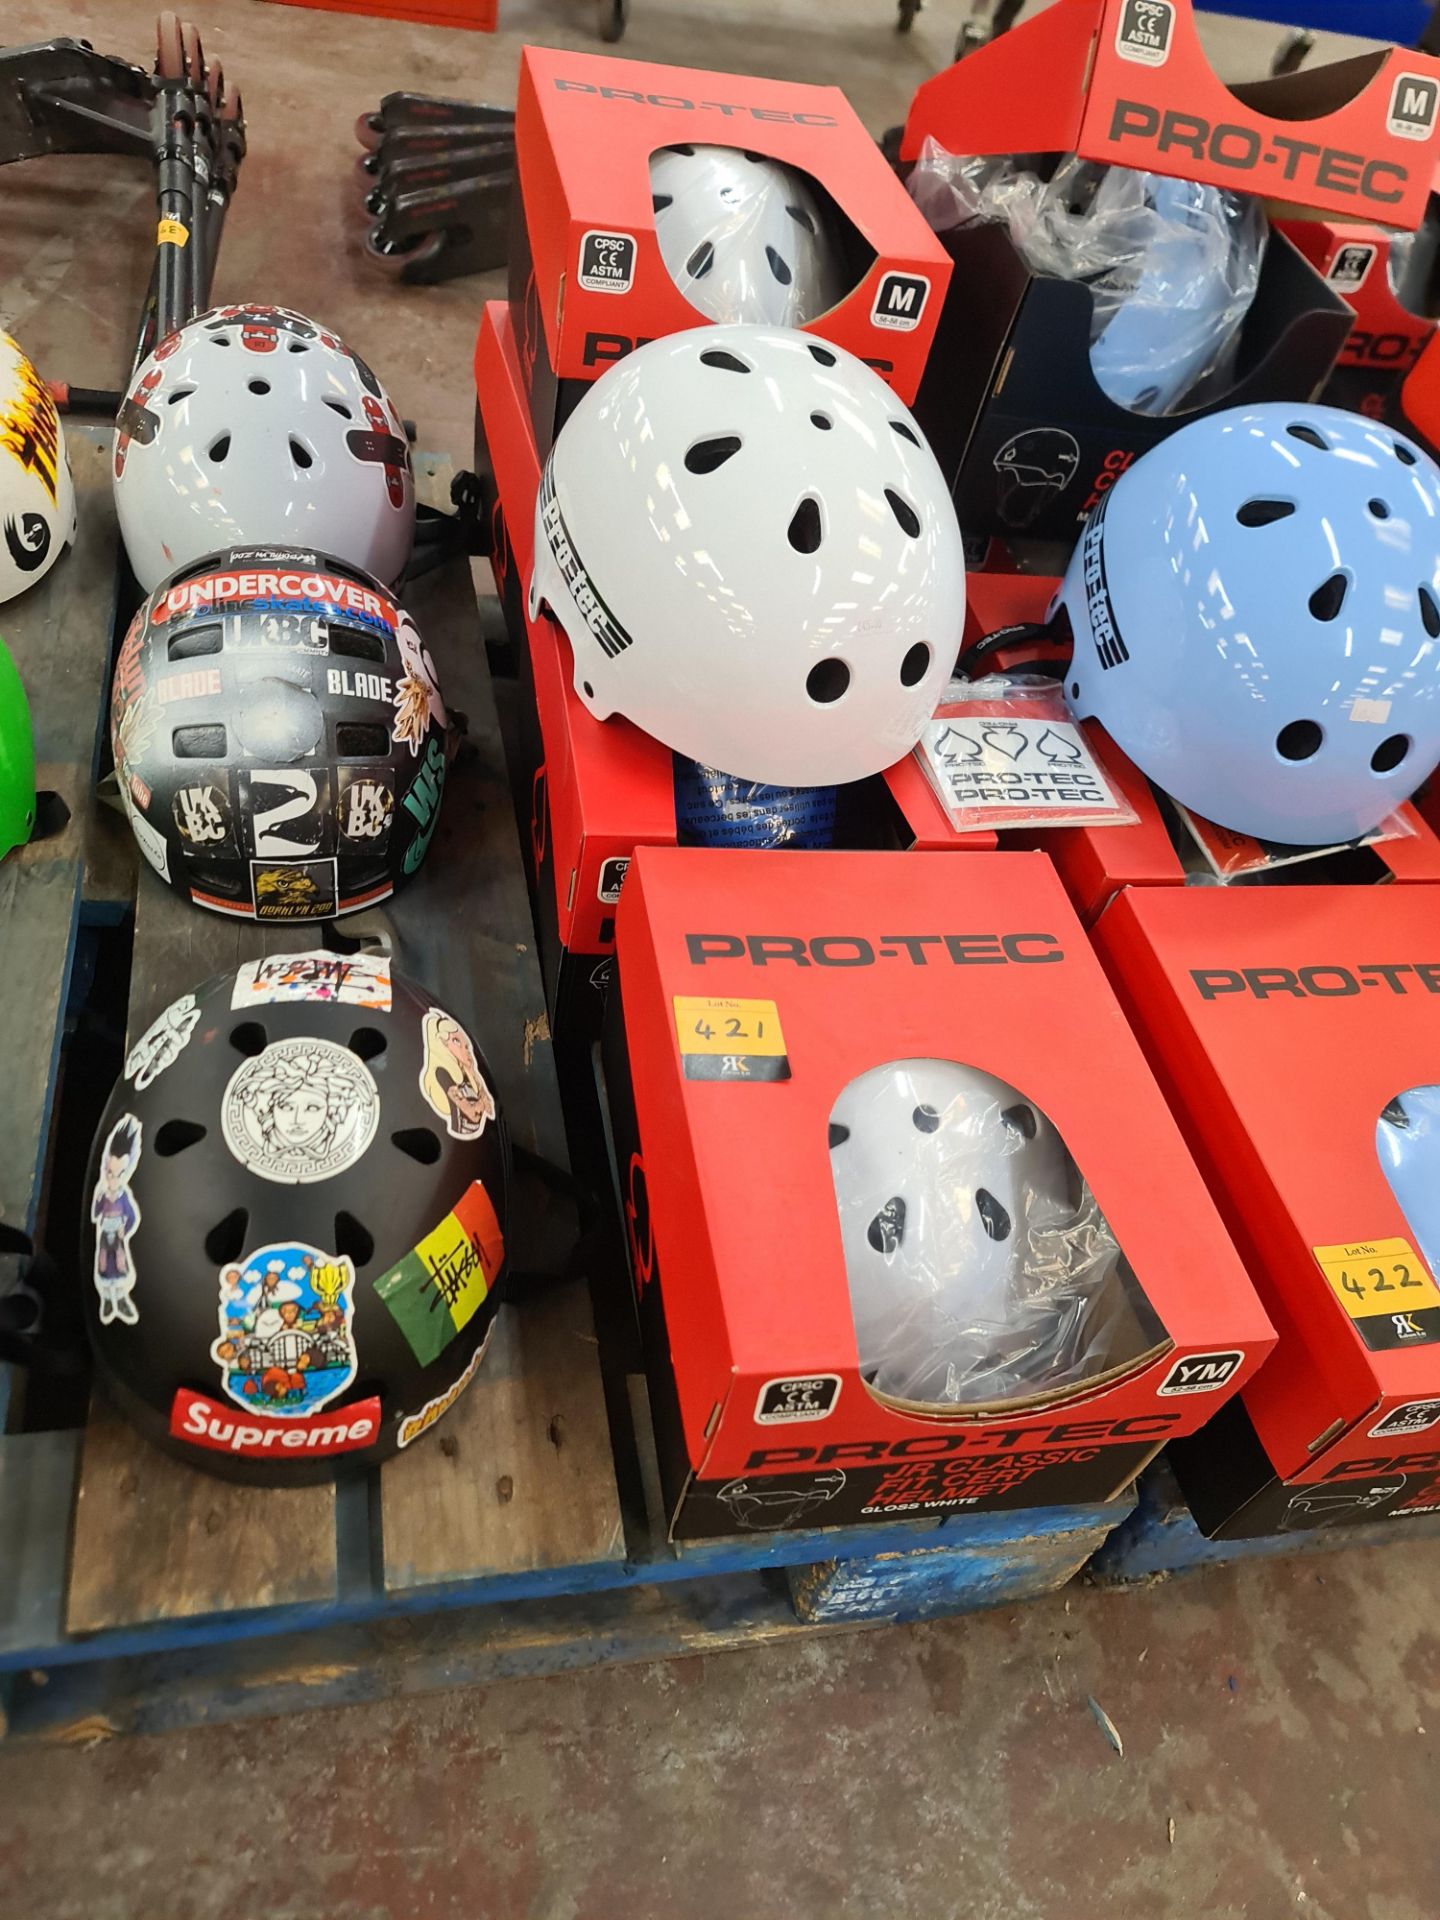 5 off Pro-Tec assorted helmets. Please note that 4 of the helmets include a box however, the boxes